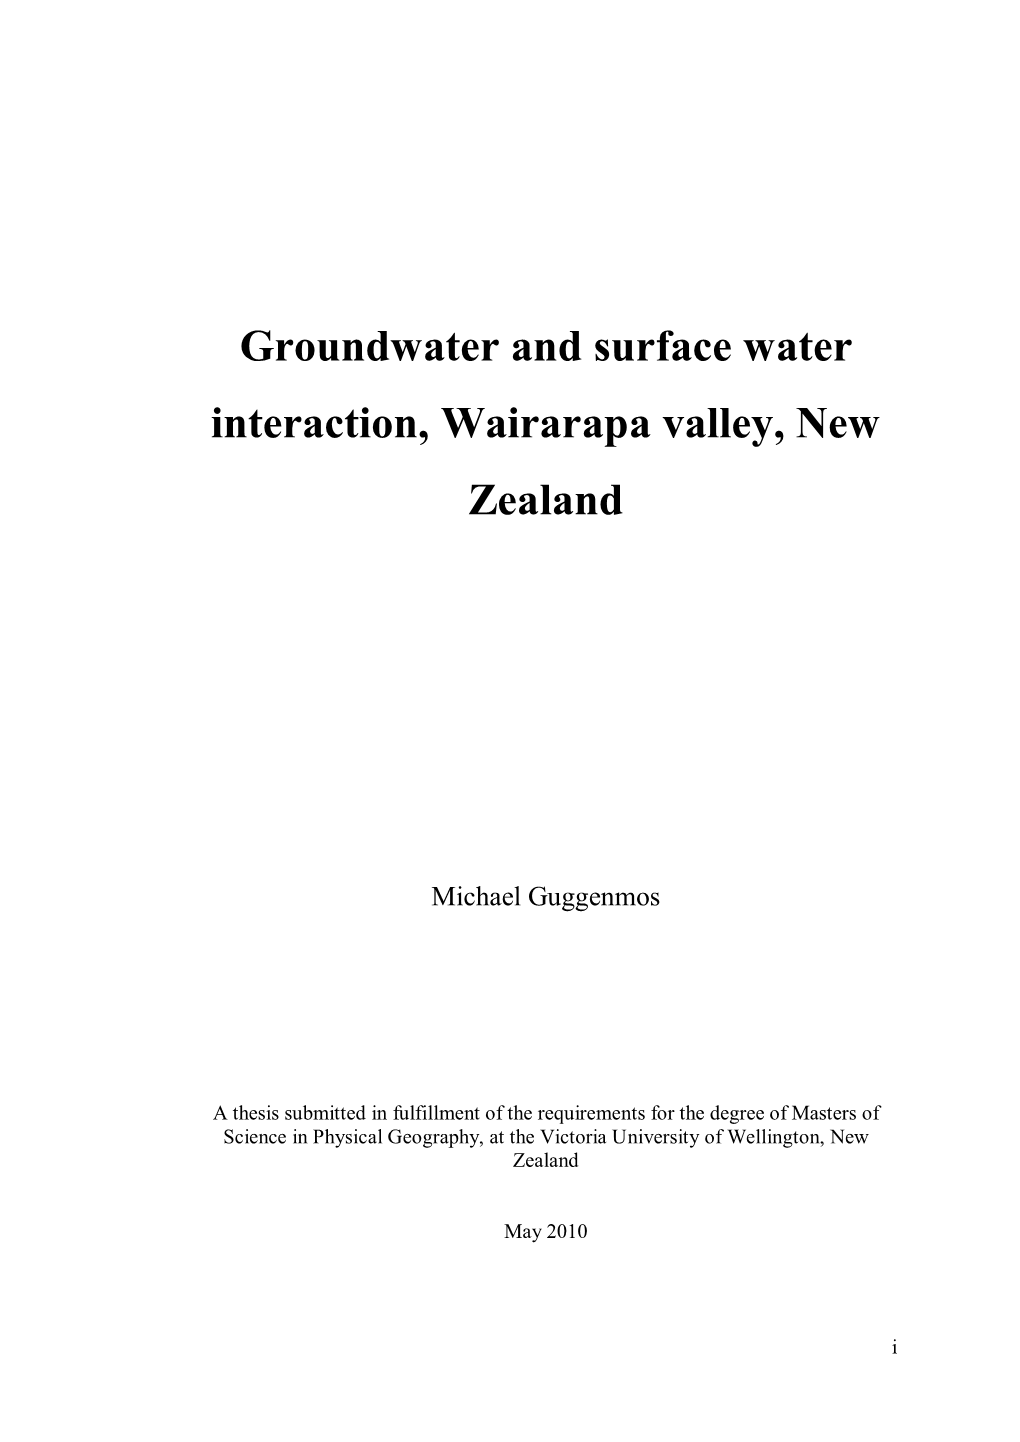 Groundwater and Surface Water Interaction, Wairarapa Valley, New Zealand